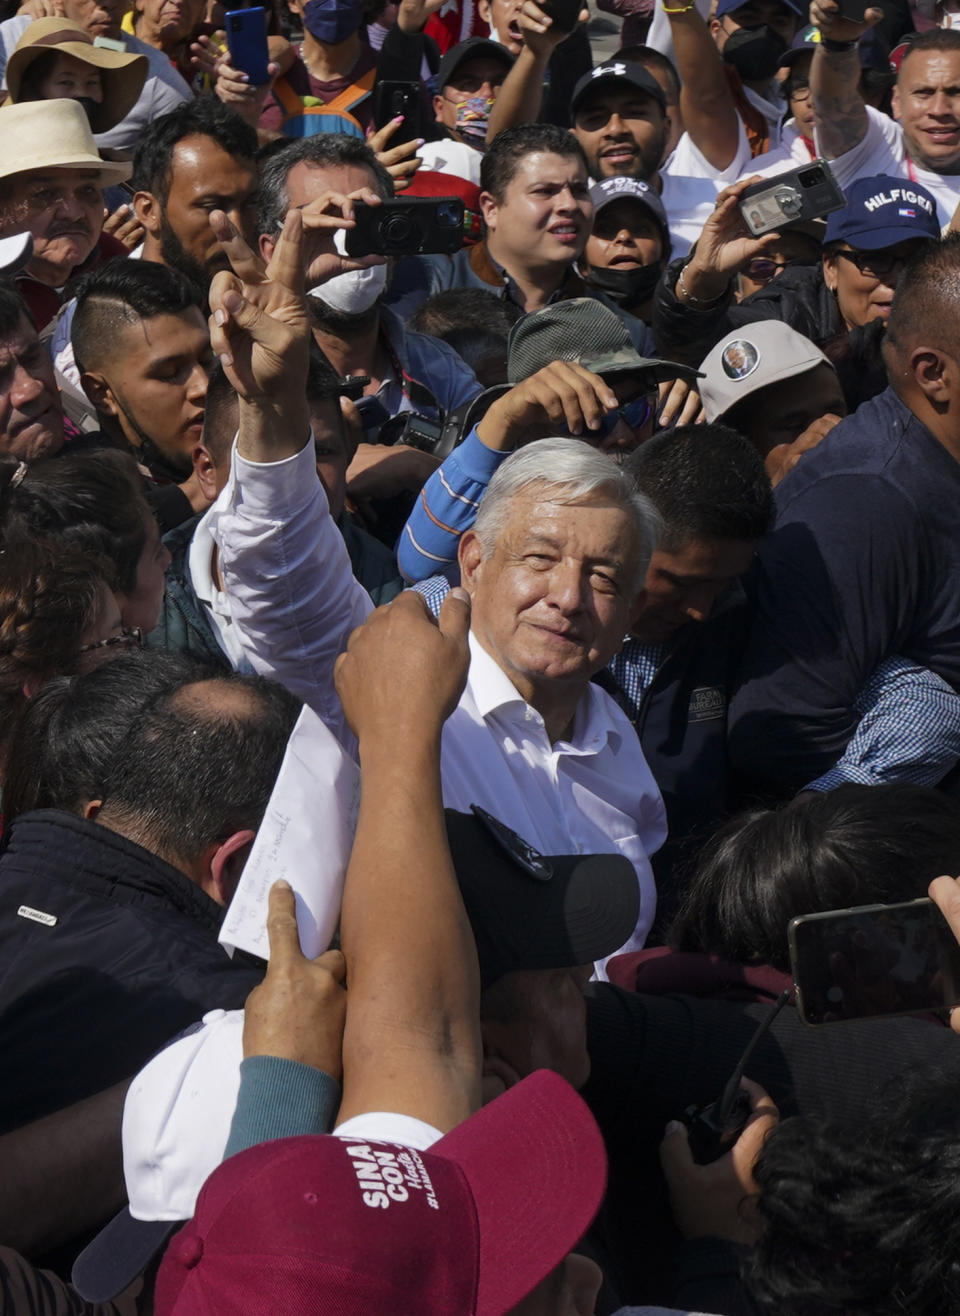 Mexican President Andrés Mexican President Andrés Manuel Lopez Obrador, right, makes the victory signal during a march in support of his administration, in Mexico City, Sunday, Nov. 27, 2022.(AP Photo/Fernando Llano)